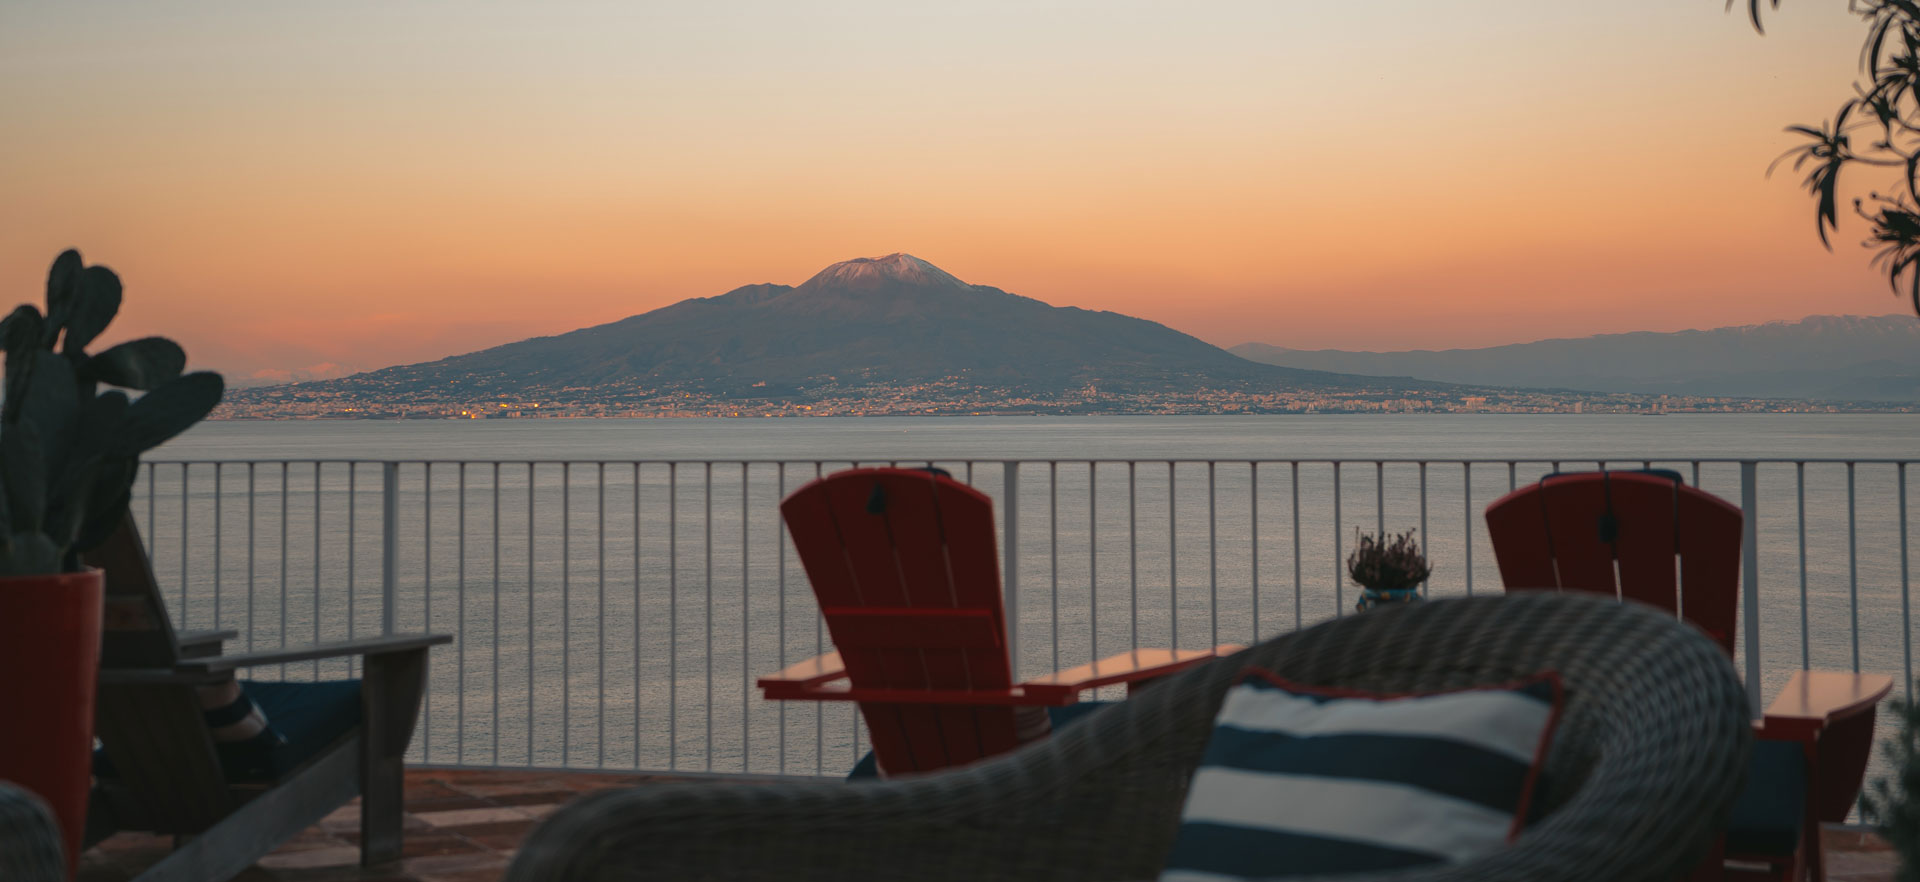 Sorrento-sunset-view-event